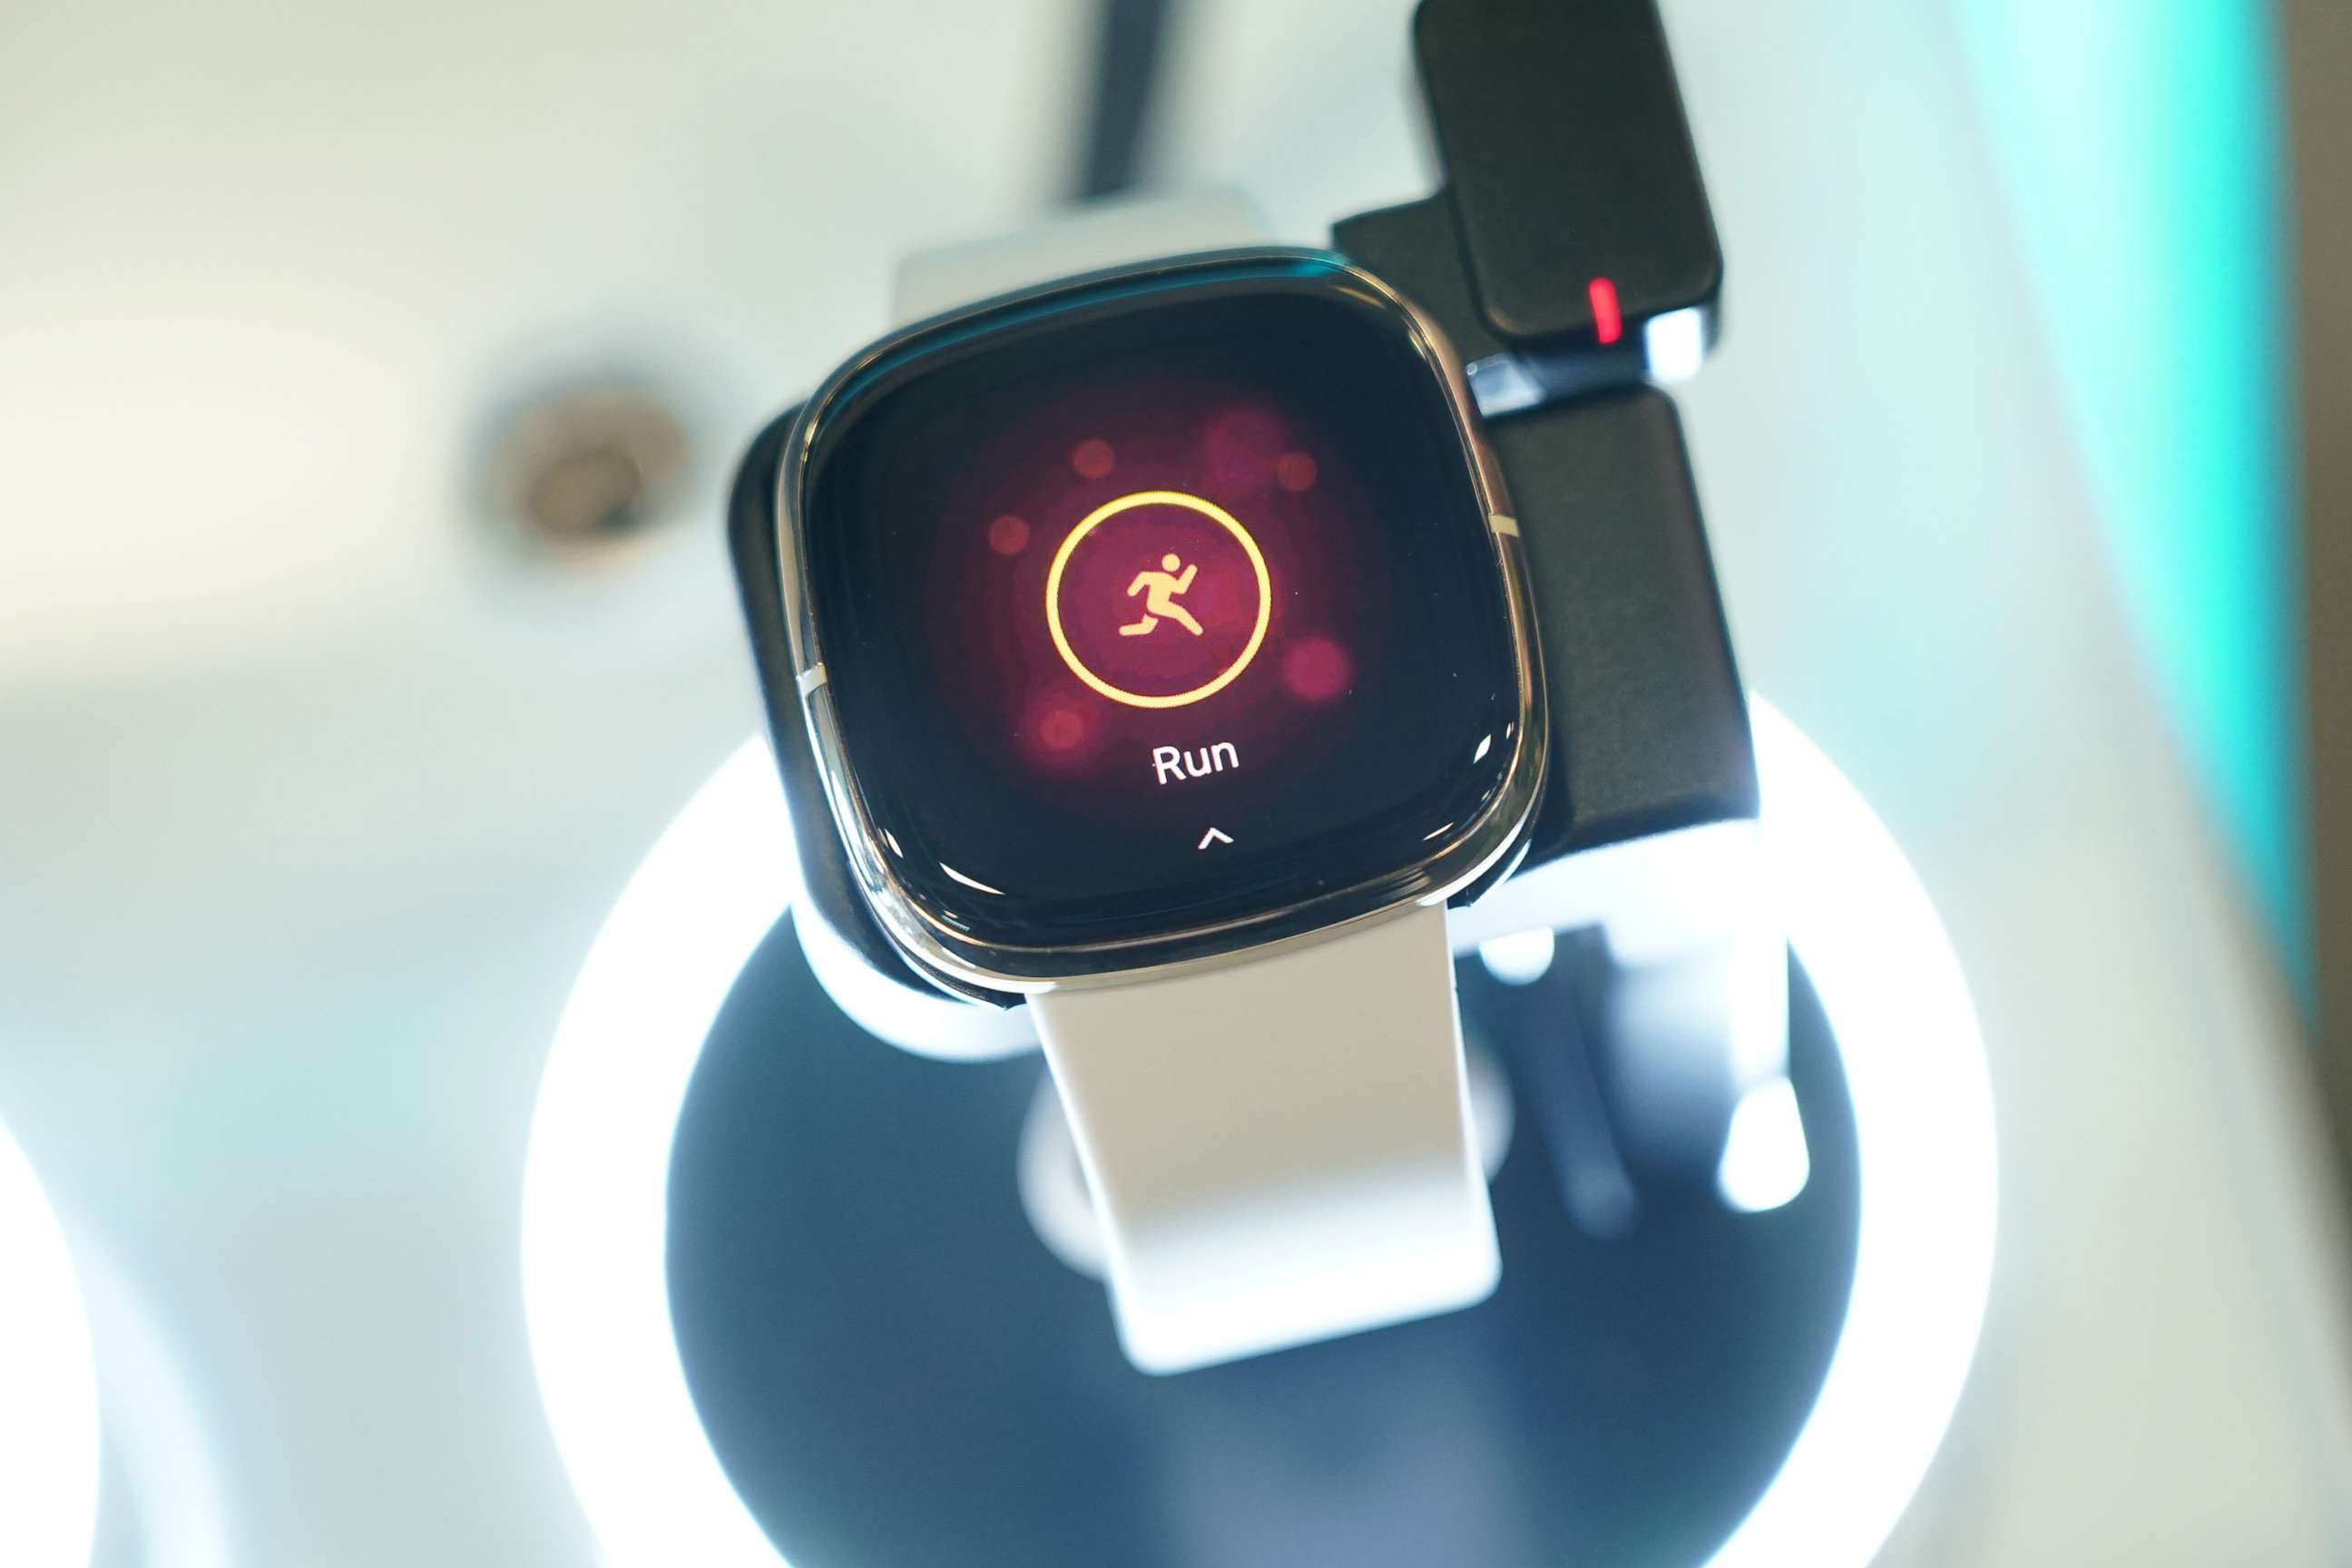 PHOTO: The Fitbit Sense health smartwatch lies on display at the Fitbit stand at the IFA 2020 Special Edition consumer electronics and appliances trade fair, Sept. 3, 2020, in Berlin.